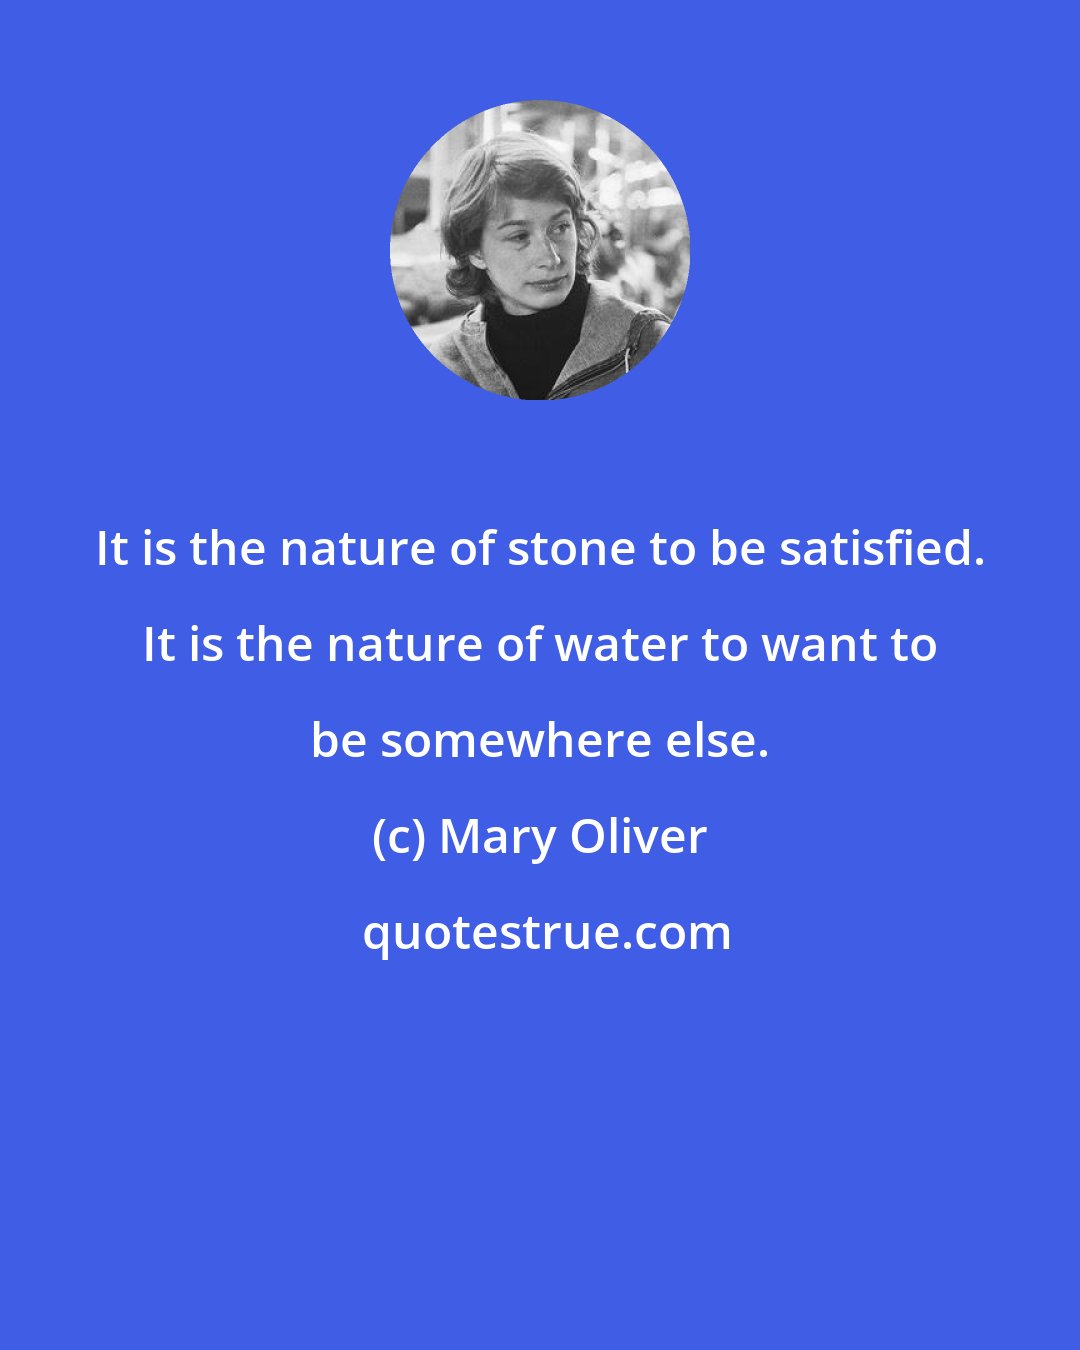 Mary Oliver: It is the nature of stone to be satisfied. It is the nature of water to want to be somewhere else.